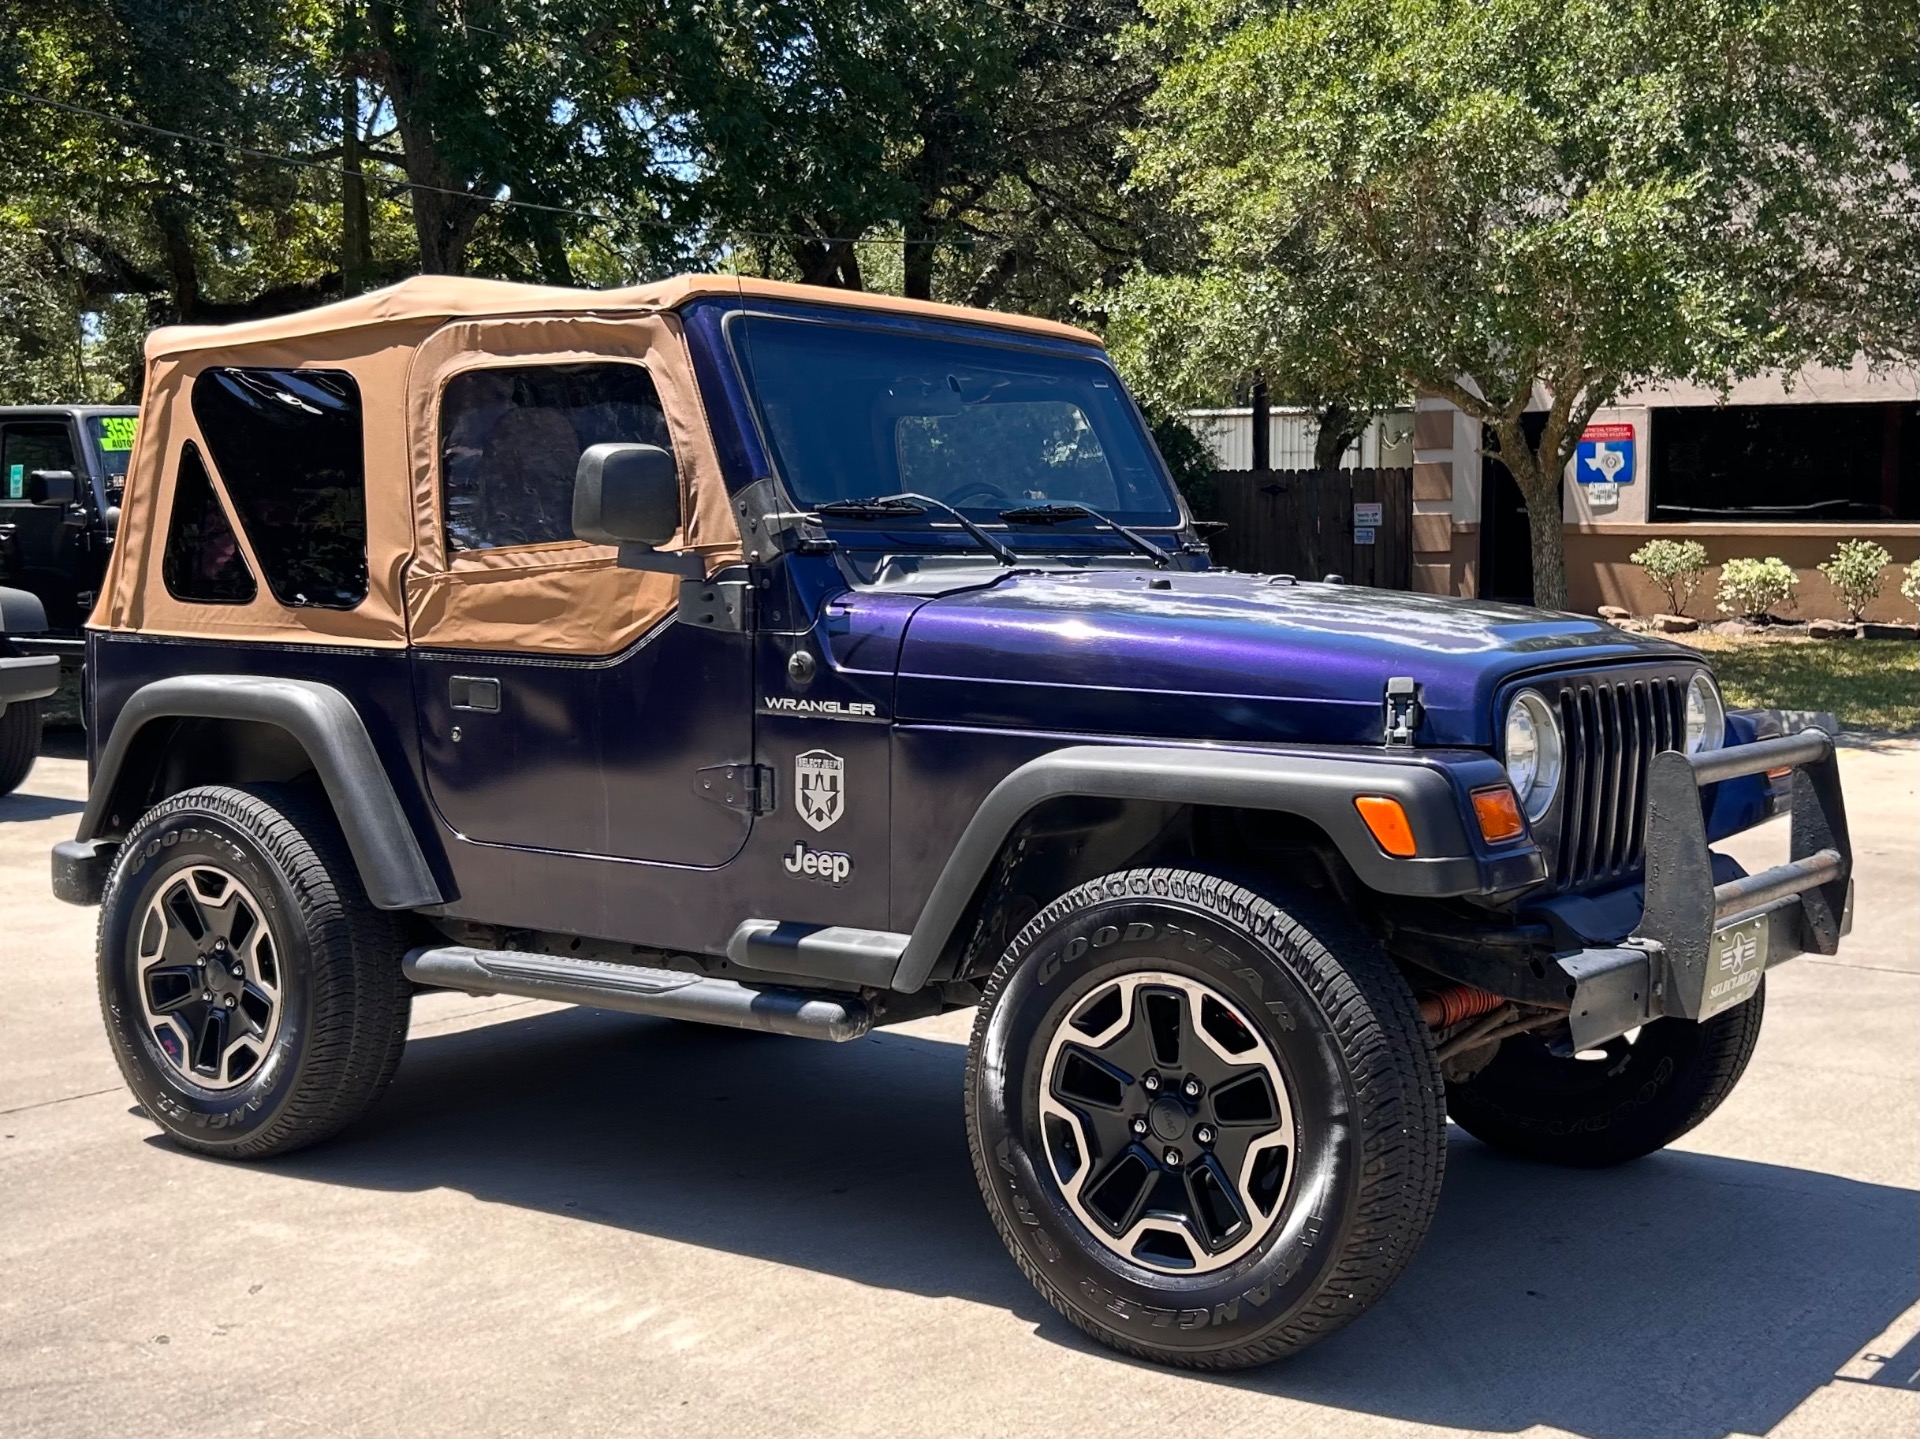 Used 1998 Jeep Wrangler SE For Sale ($10,995) | Select Jeeps Inc. Stock  #718648